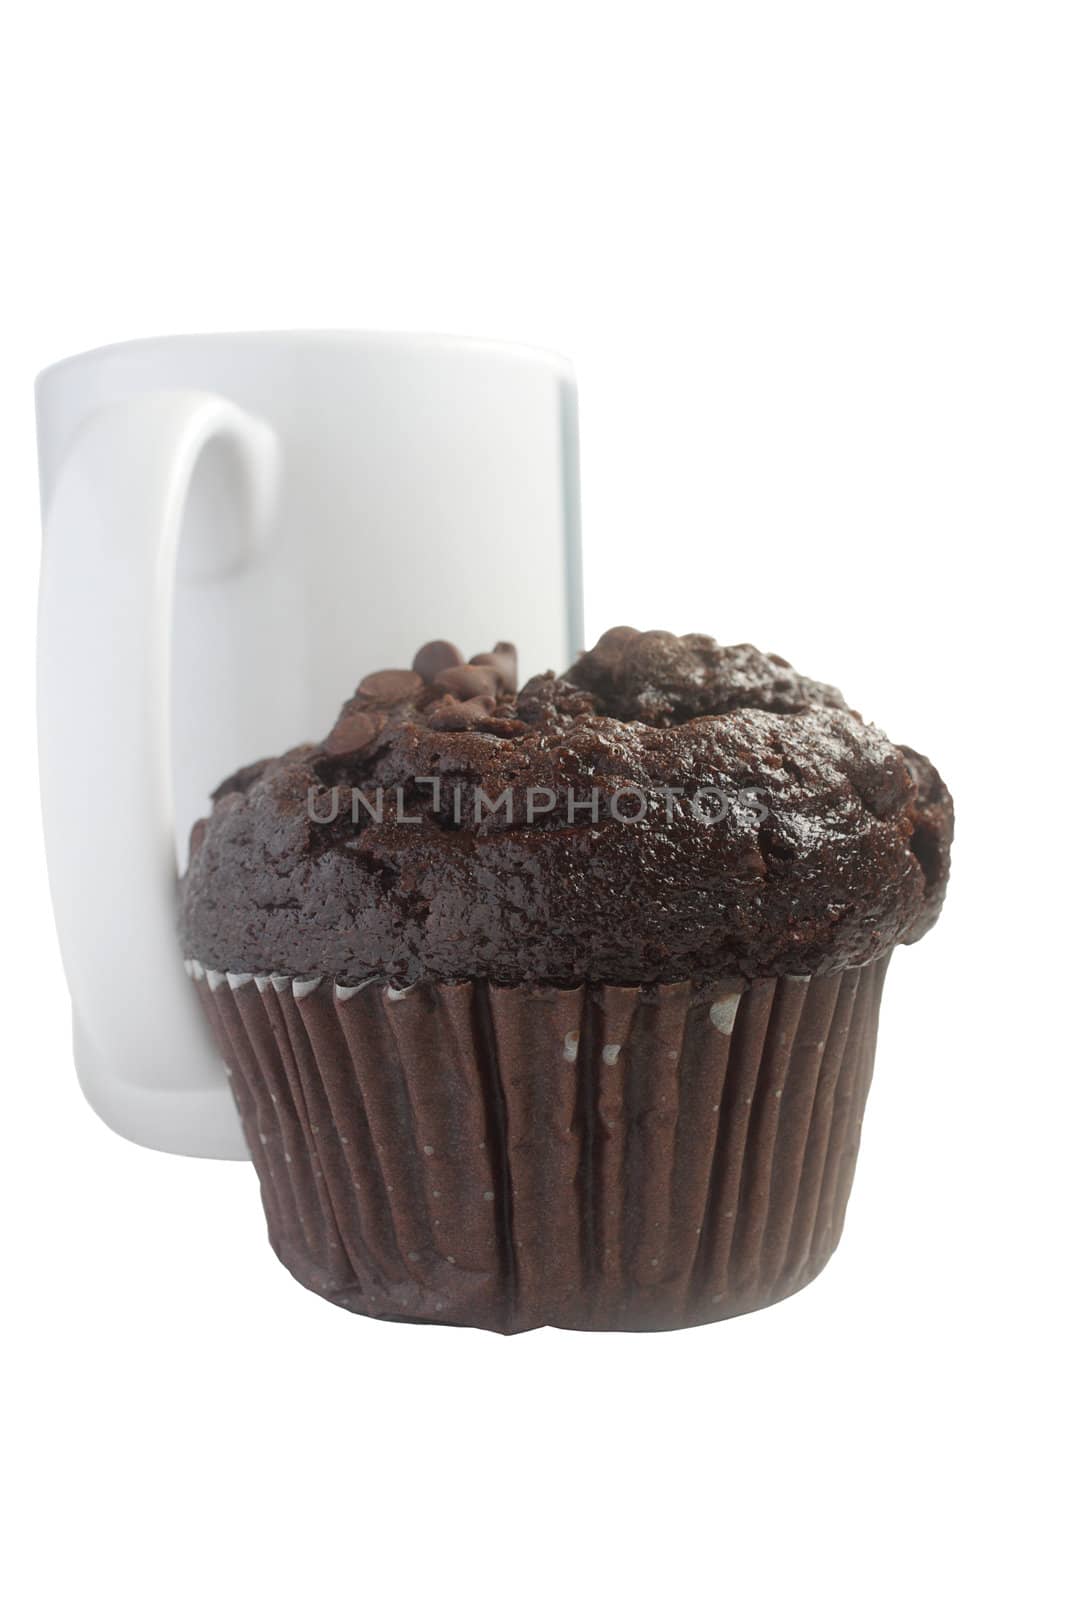 Chocolate muffin and a white cup by pulen